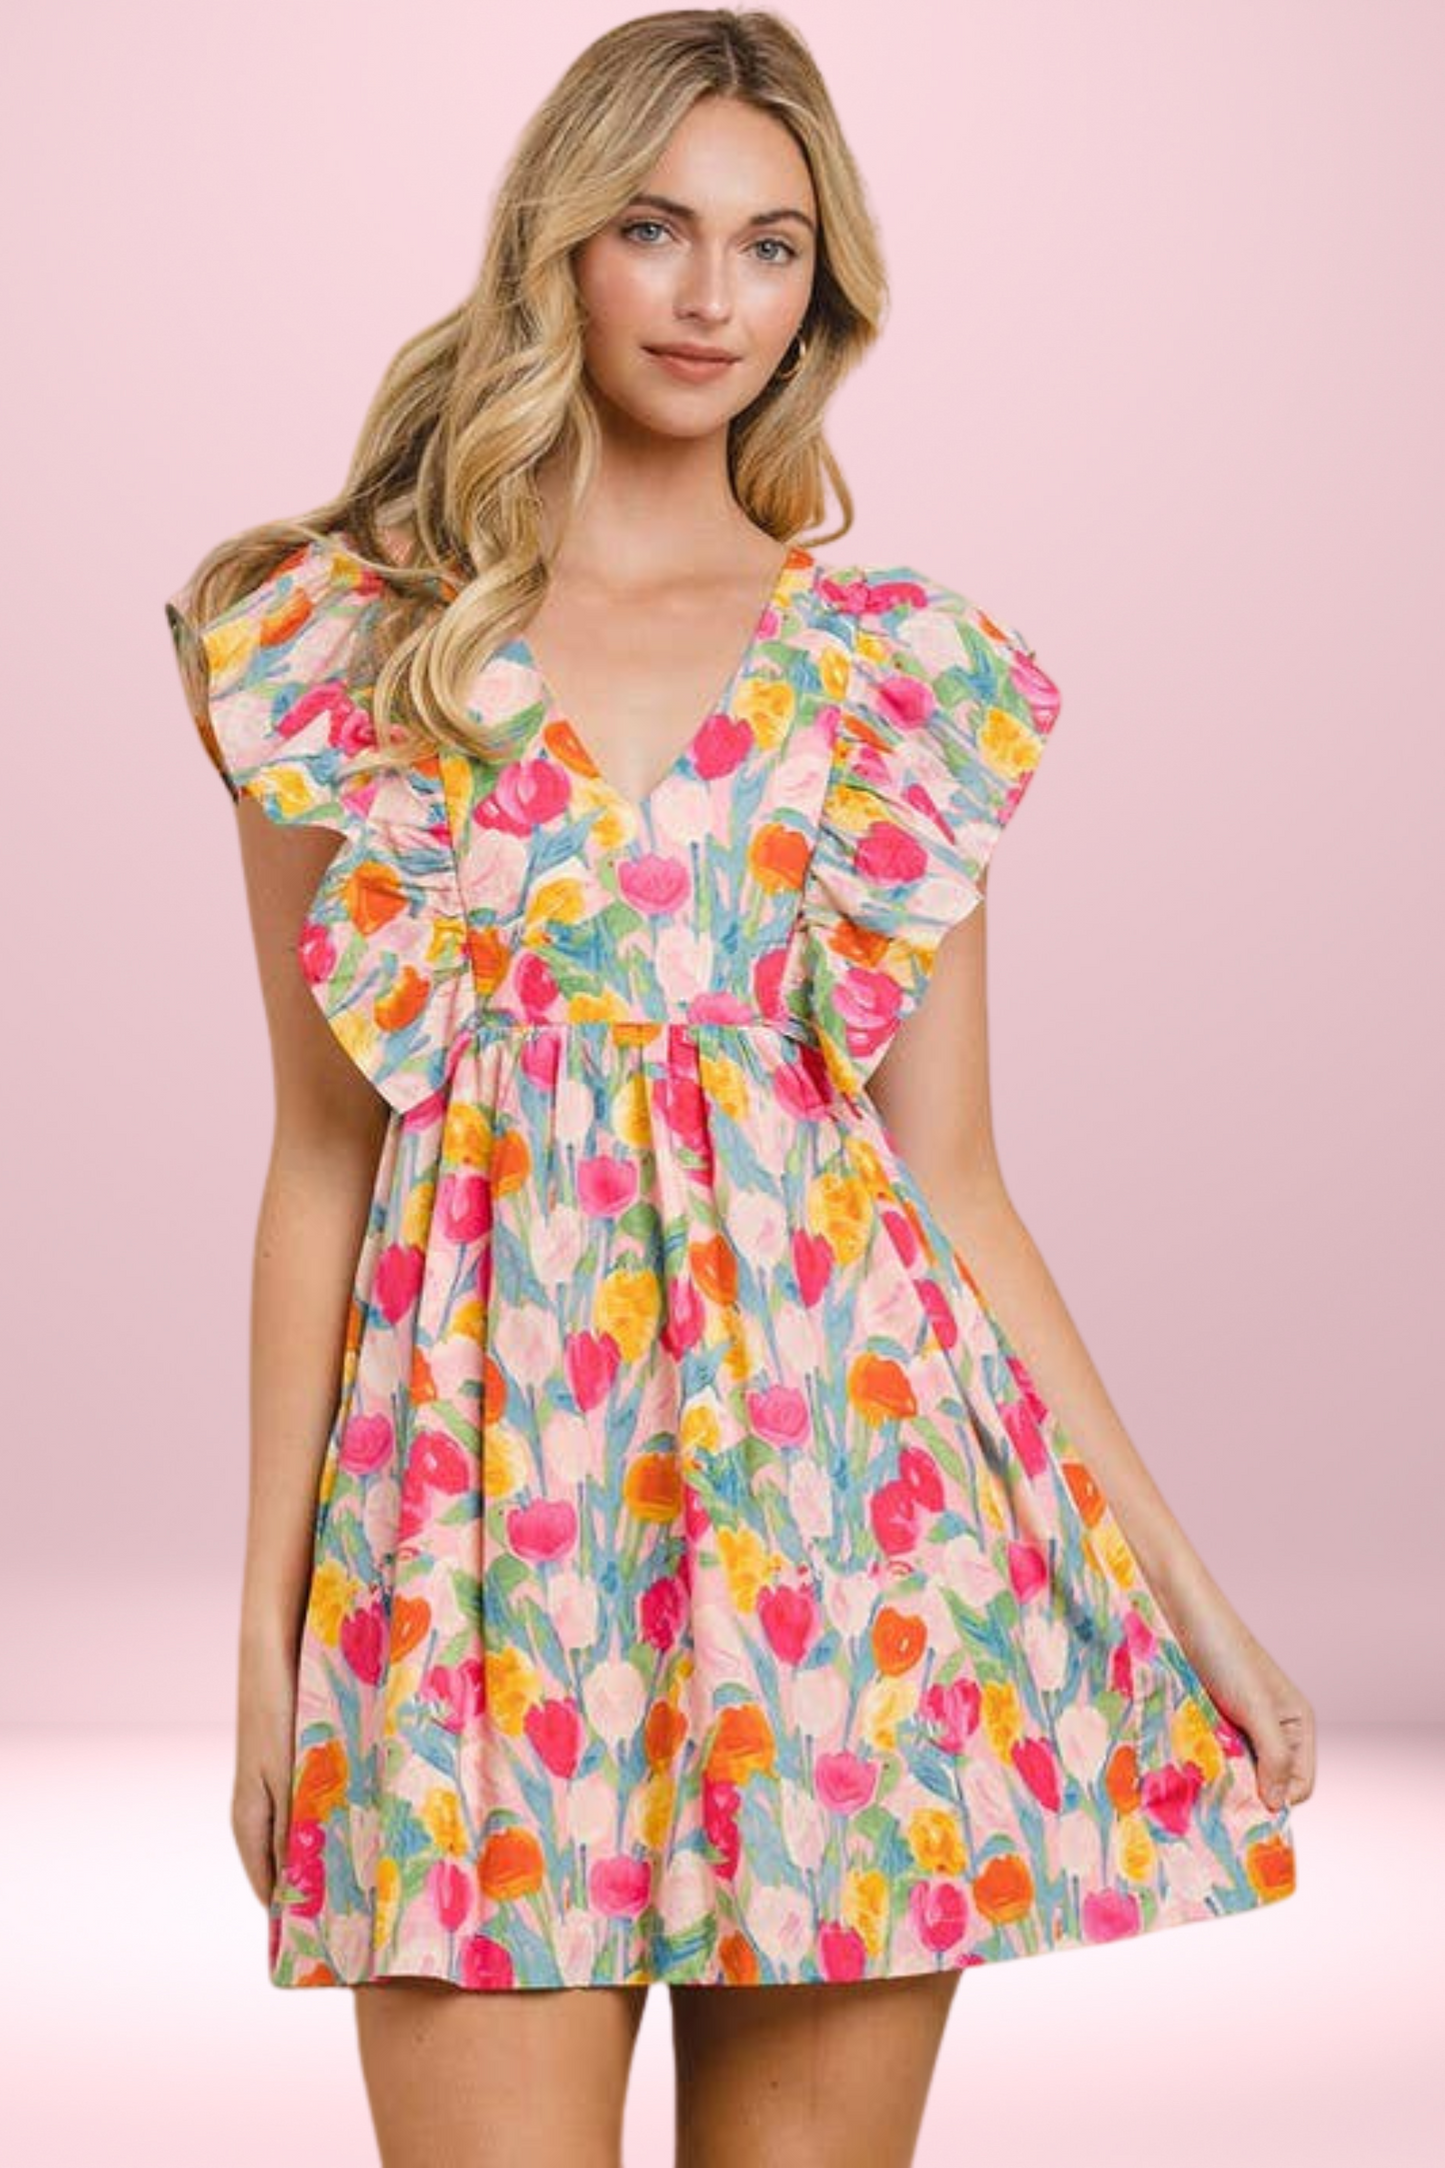 Welcome to Holland Tulips Dress with Ruffle Sleeves